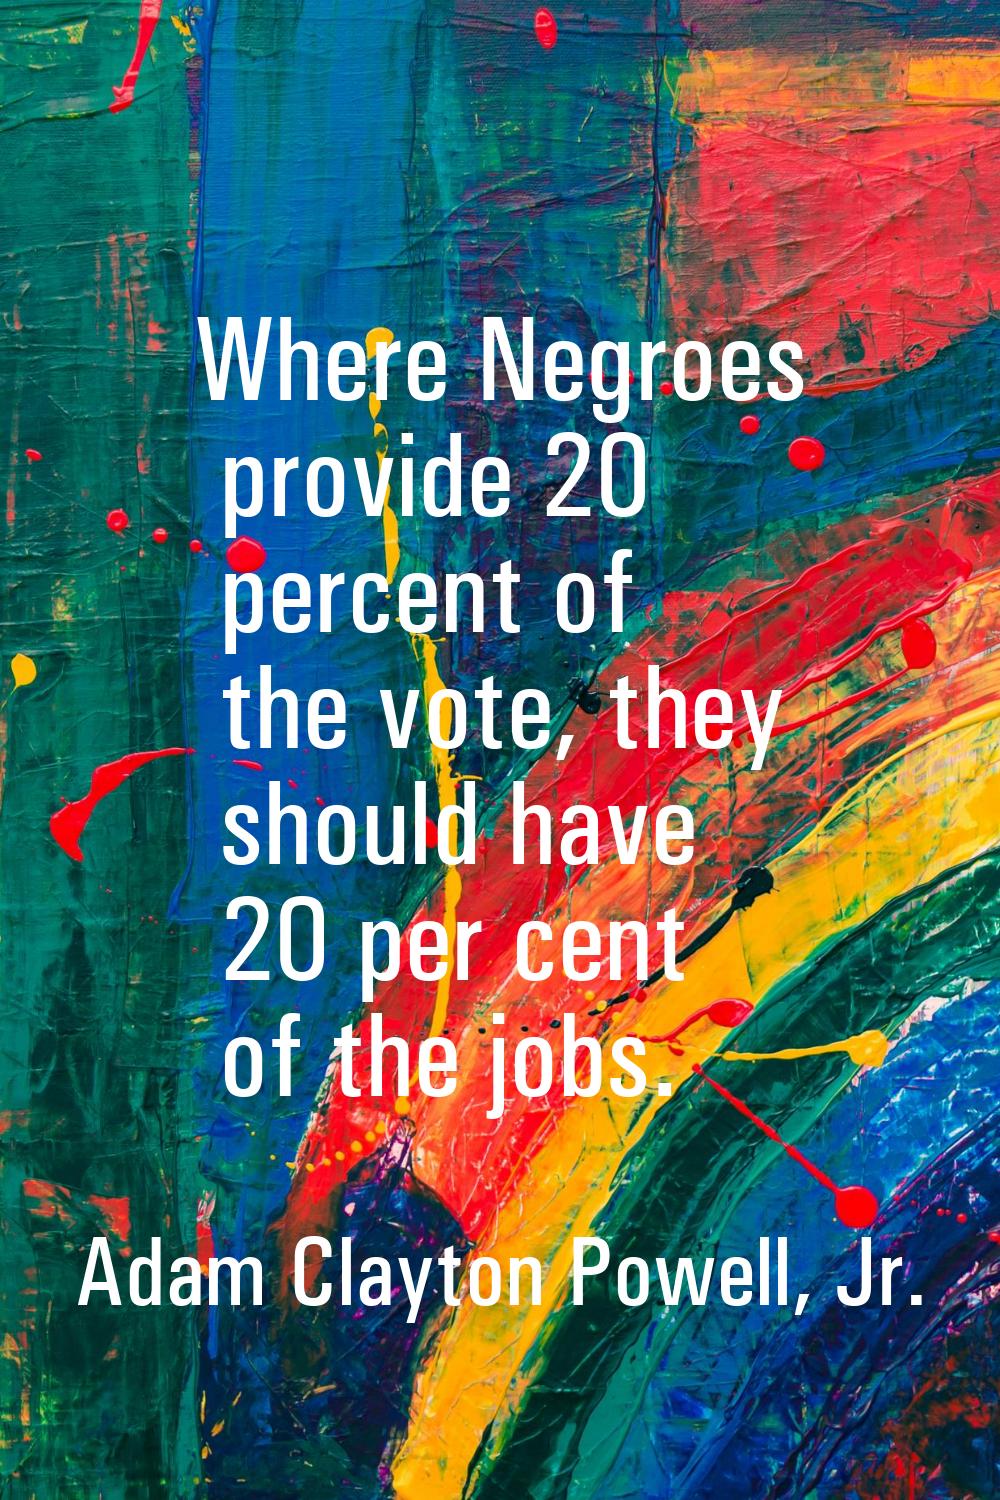 Where Negroes provide 20 percent of the vote, they should have 20 per cent of the jobs.